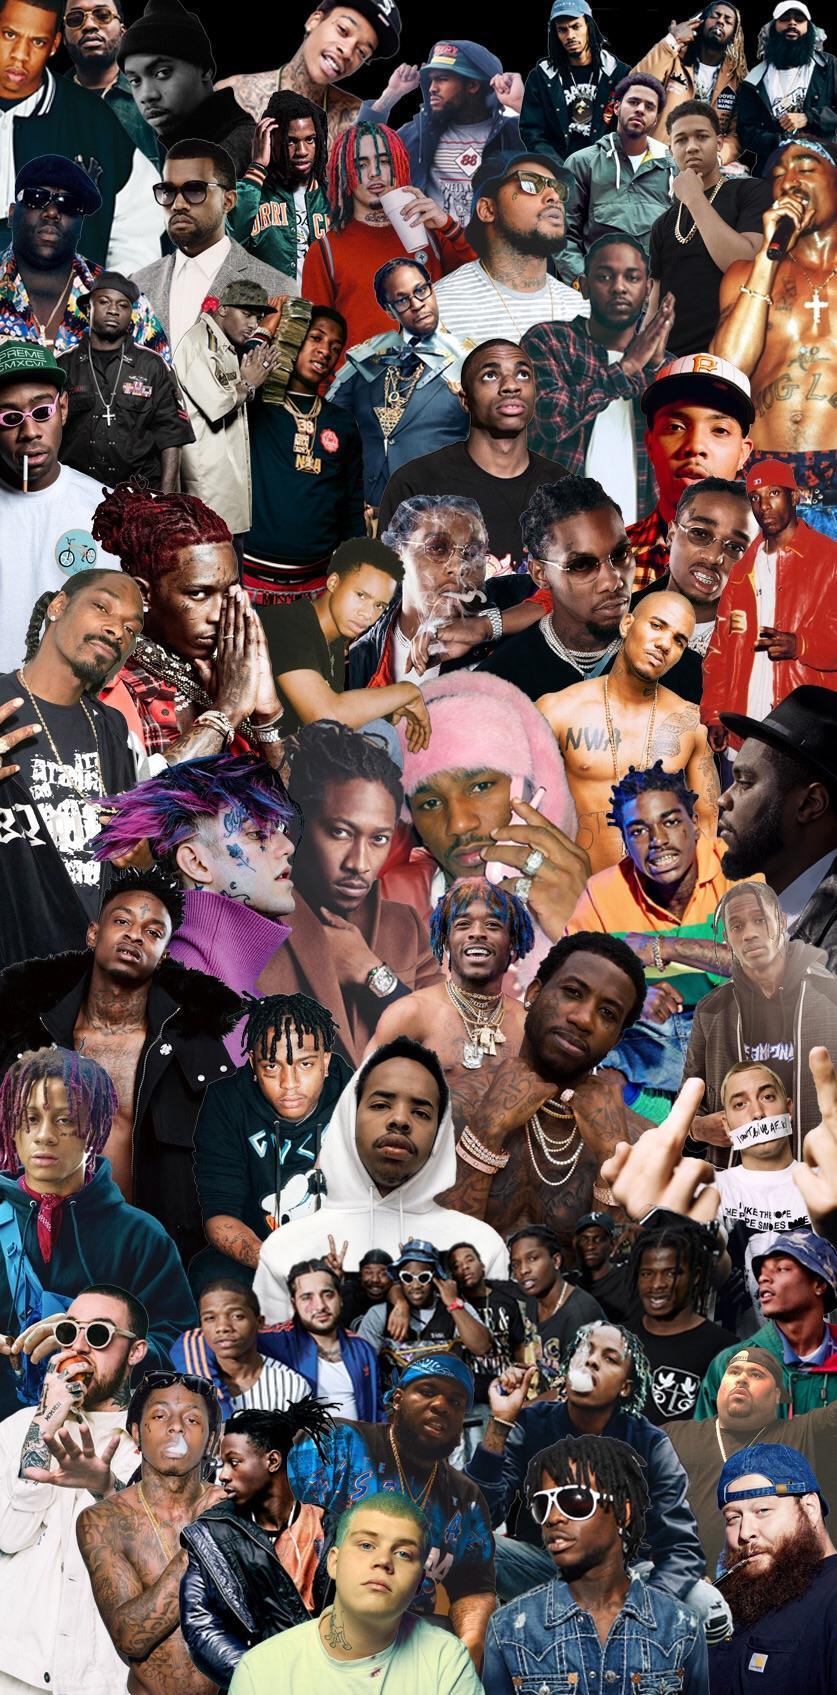 60 Rapper wallpapers collages ideas  celebrity wallpapers rapper  wallpaper iphone cute lockscreens